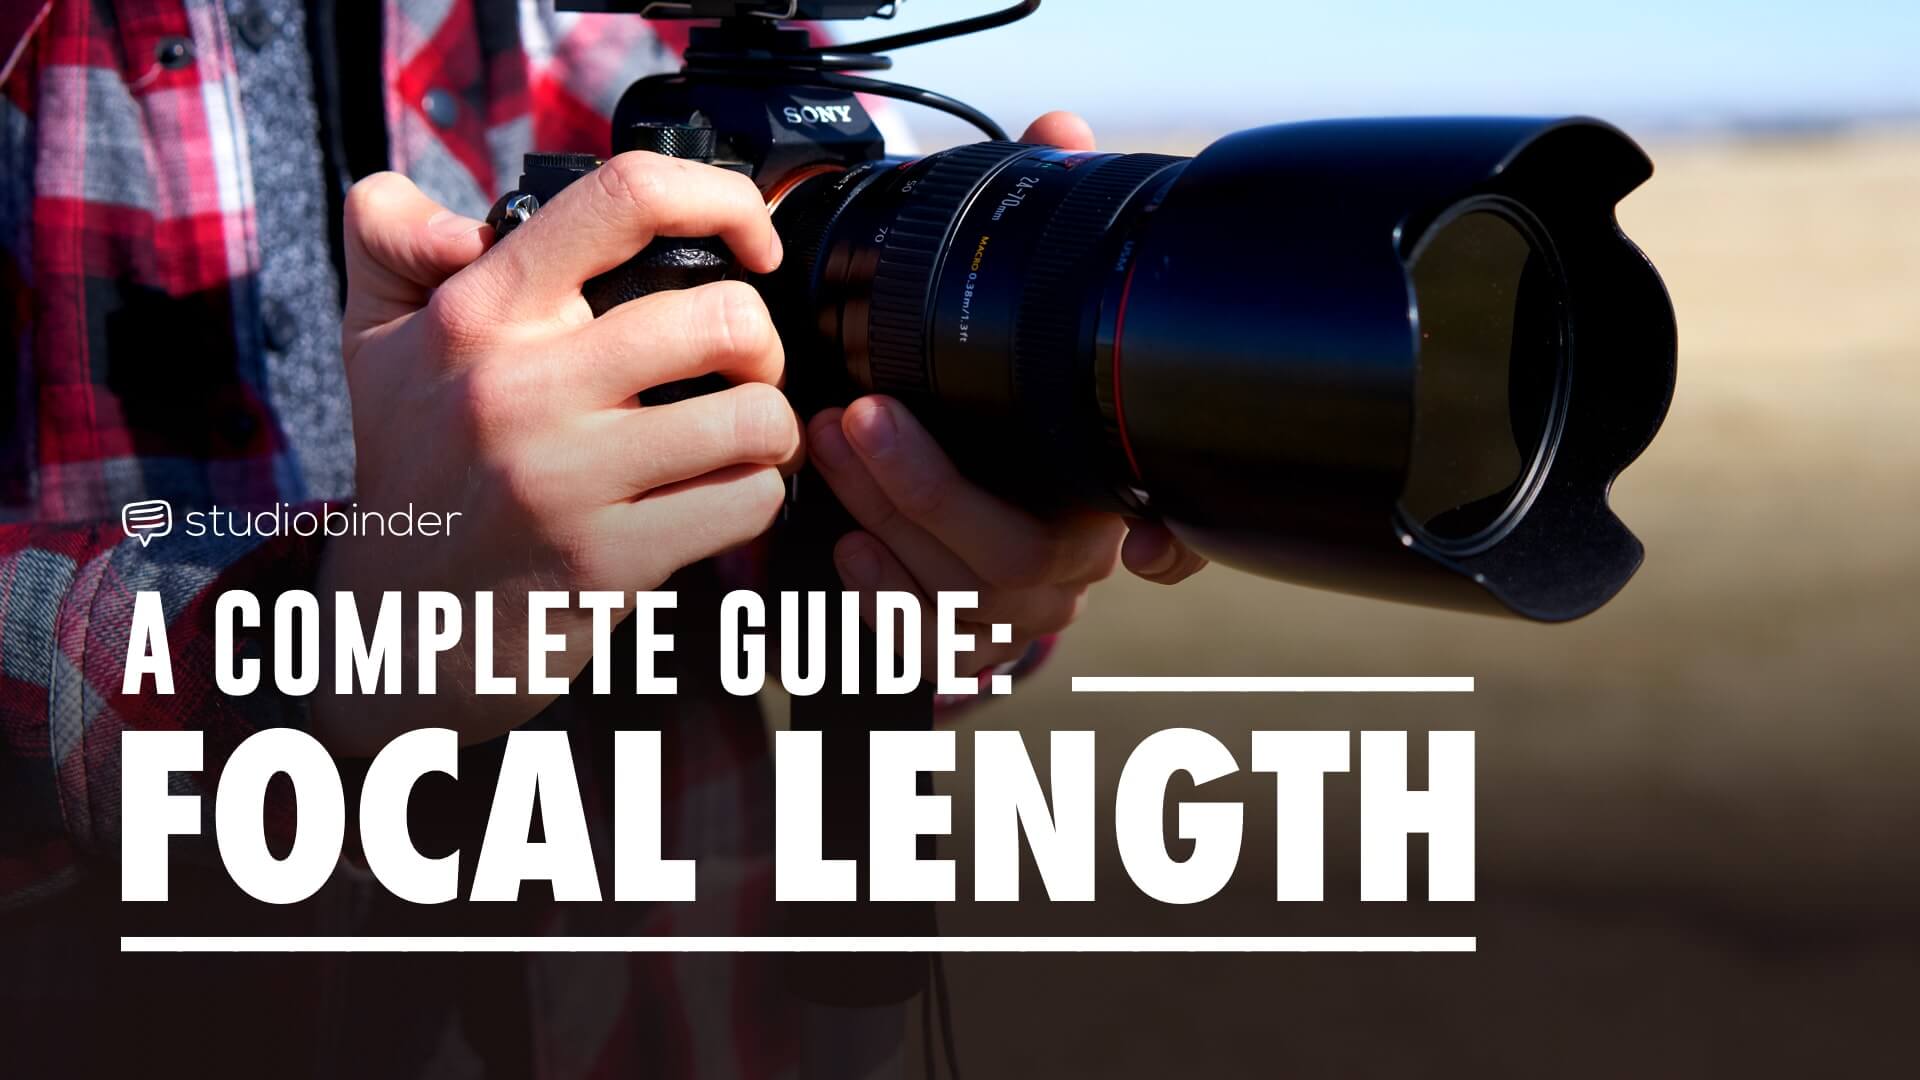 Focal Length An Easy Guide To Using And Understanding Camera Lenses